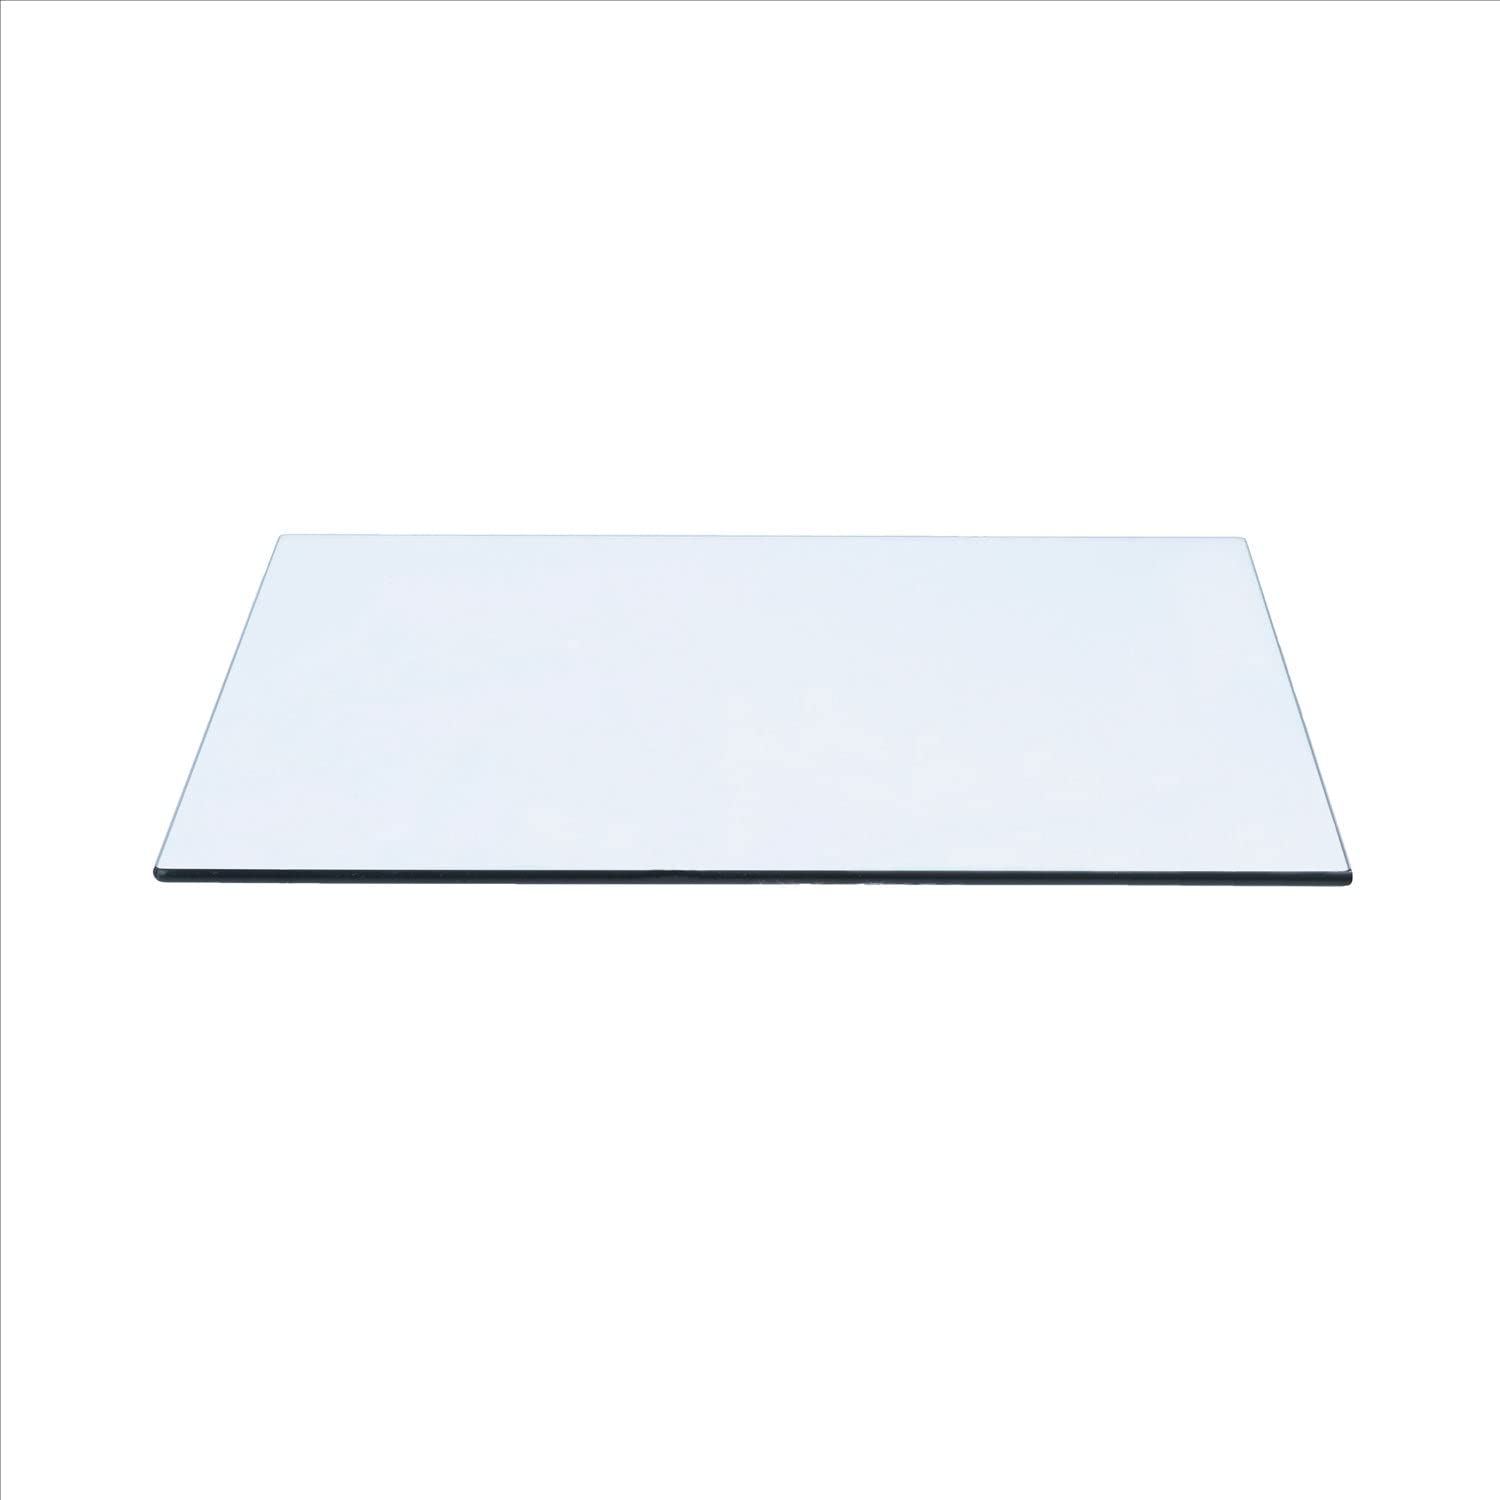 Spancraft 15" x 36" Rectangle Clear Tempered Glass Table Top 3/8" Thick - Flat Polish Edge